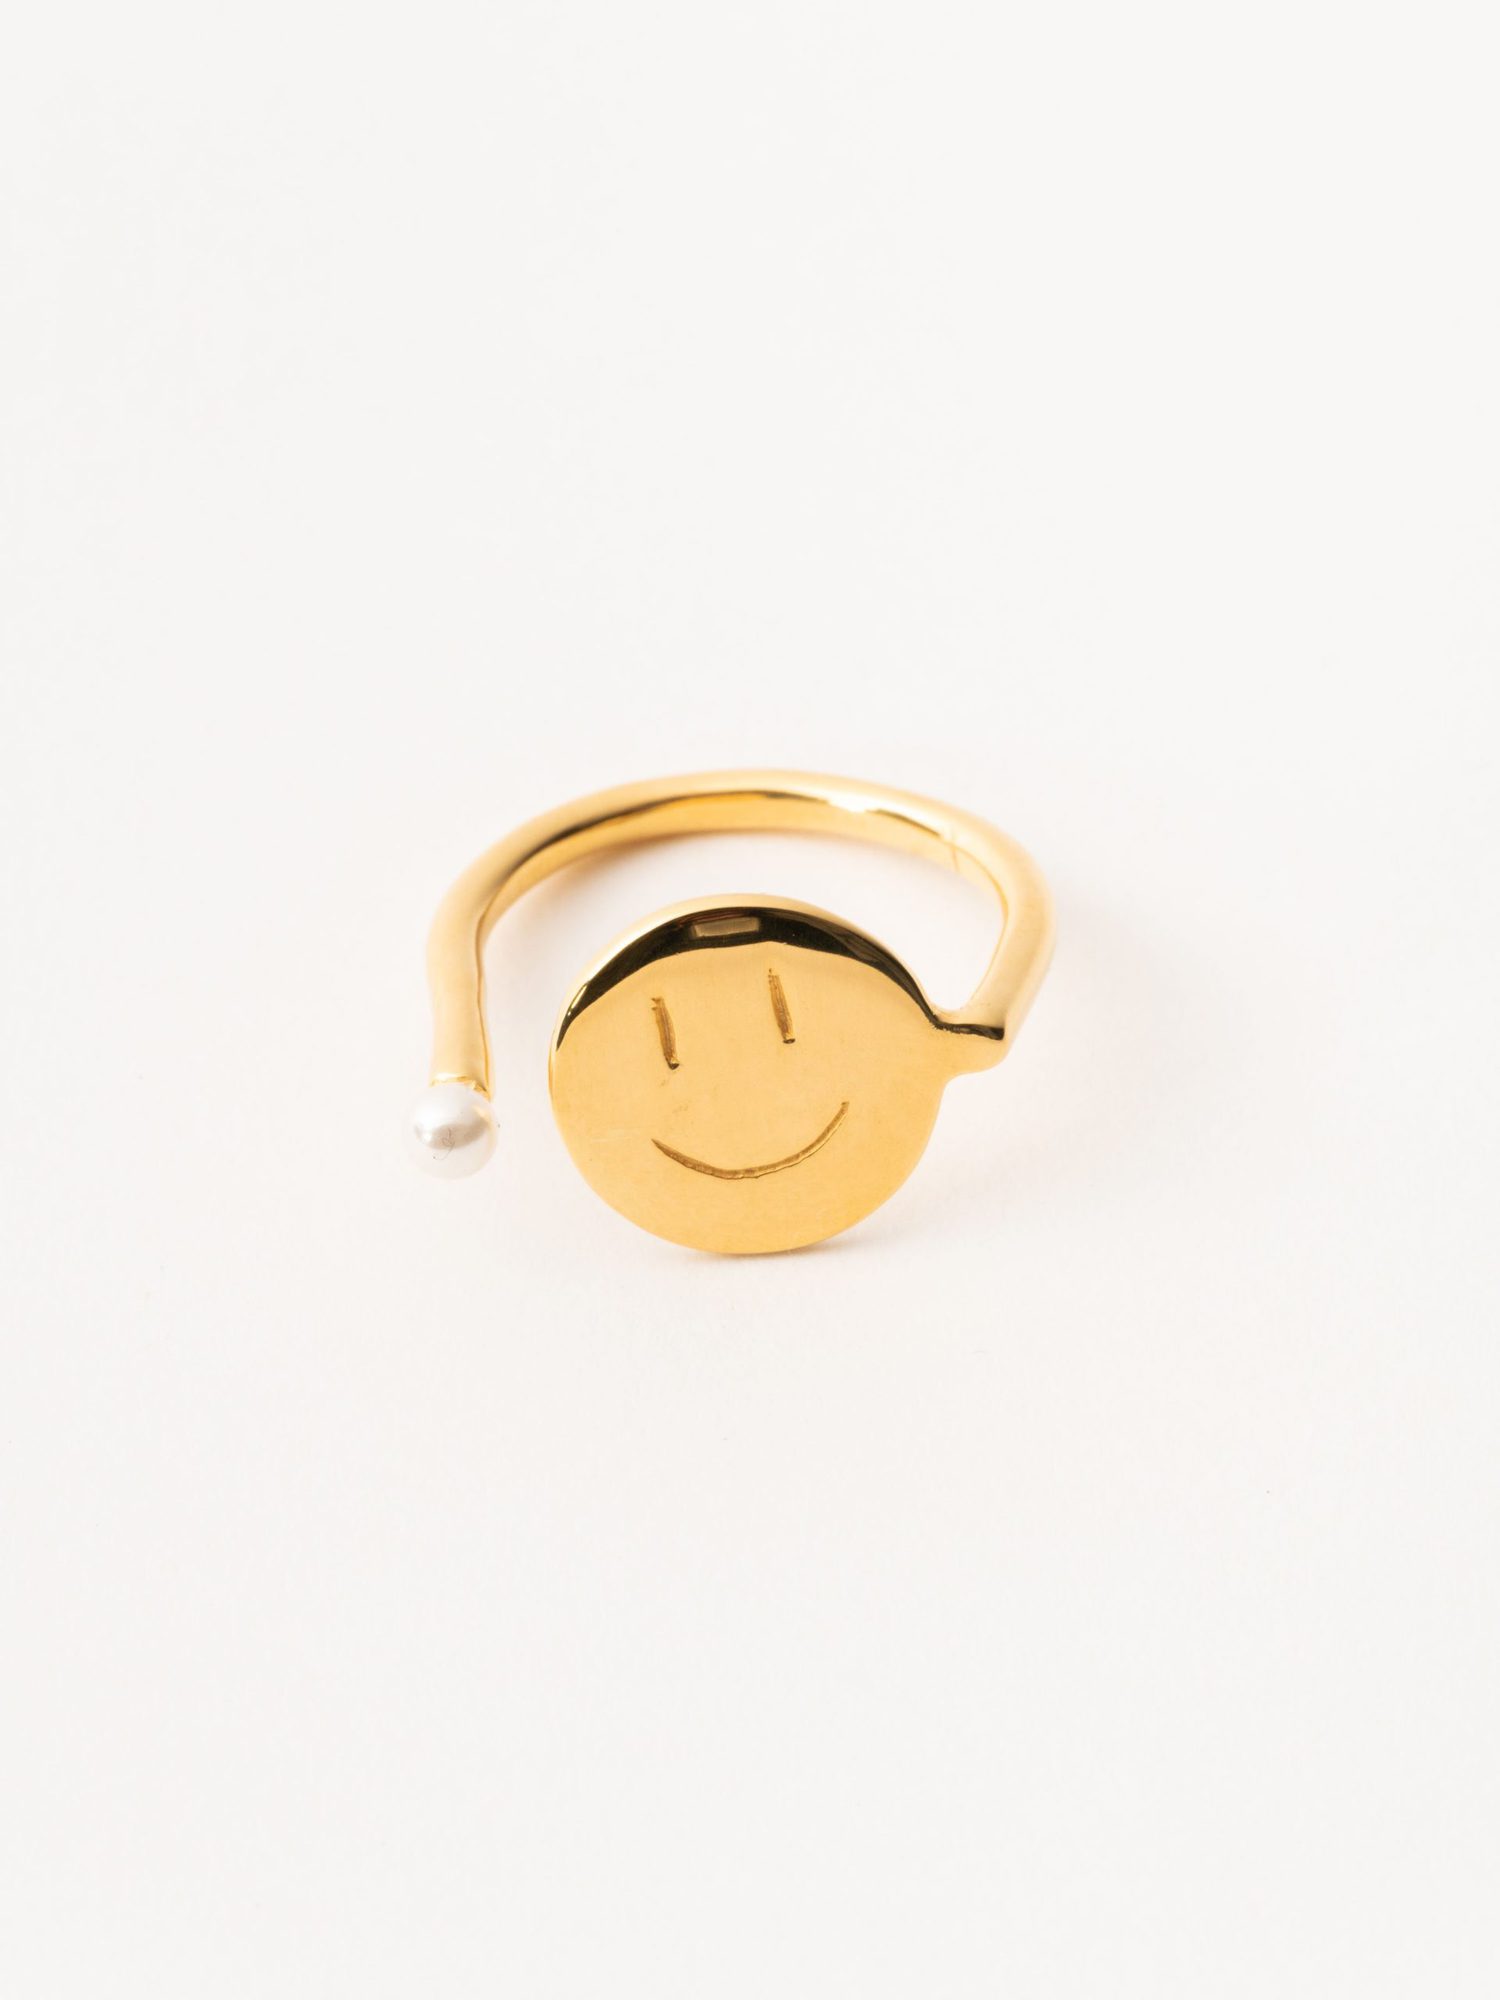 Gold Smiley Face Open Charm Ring